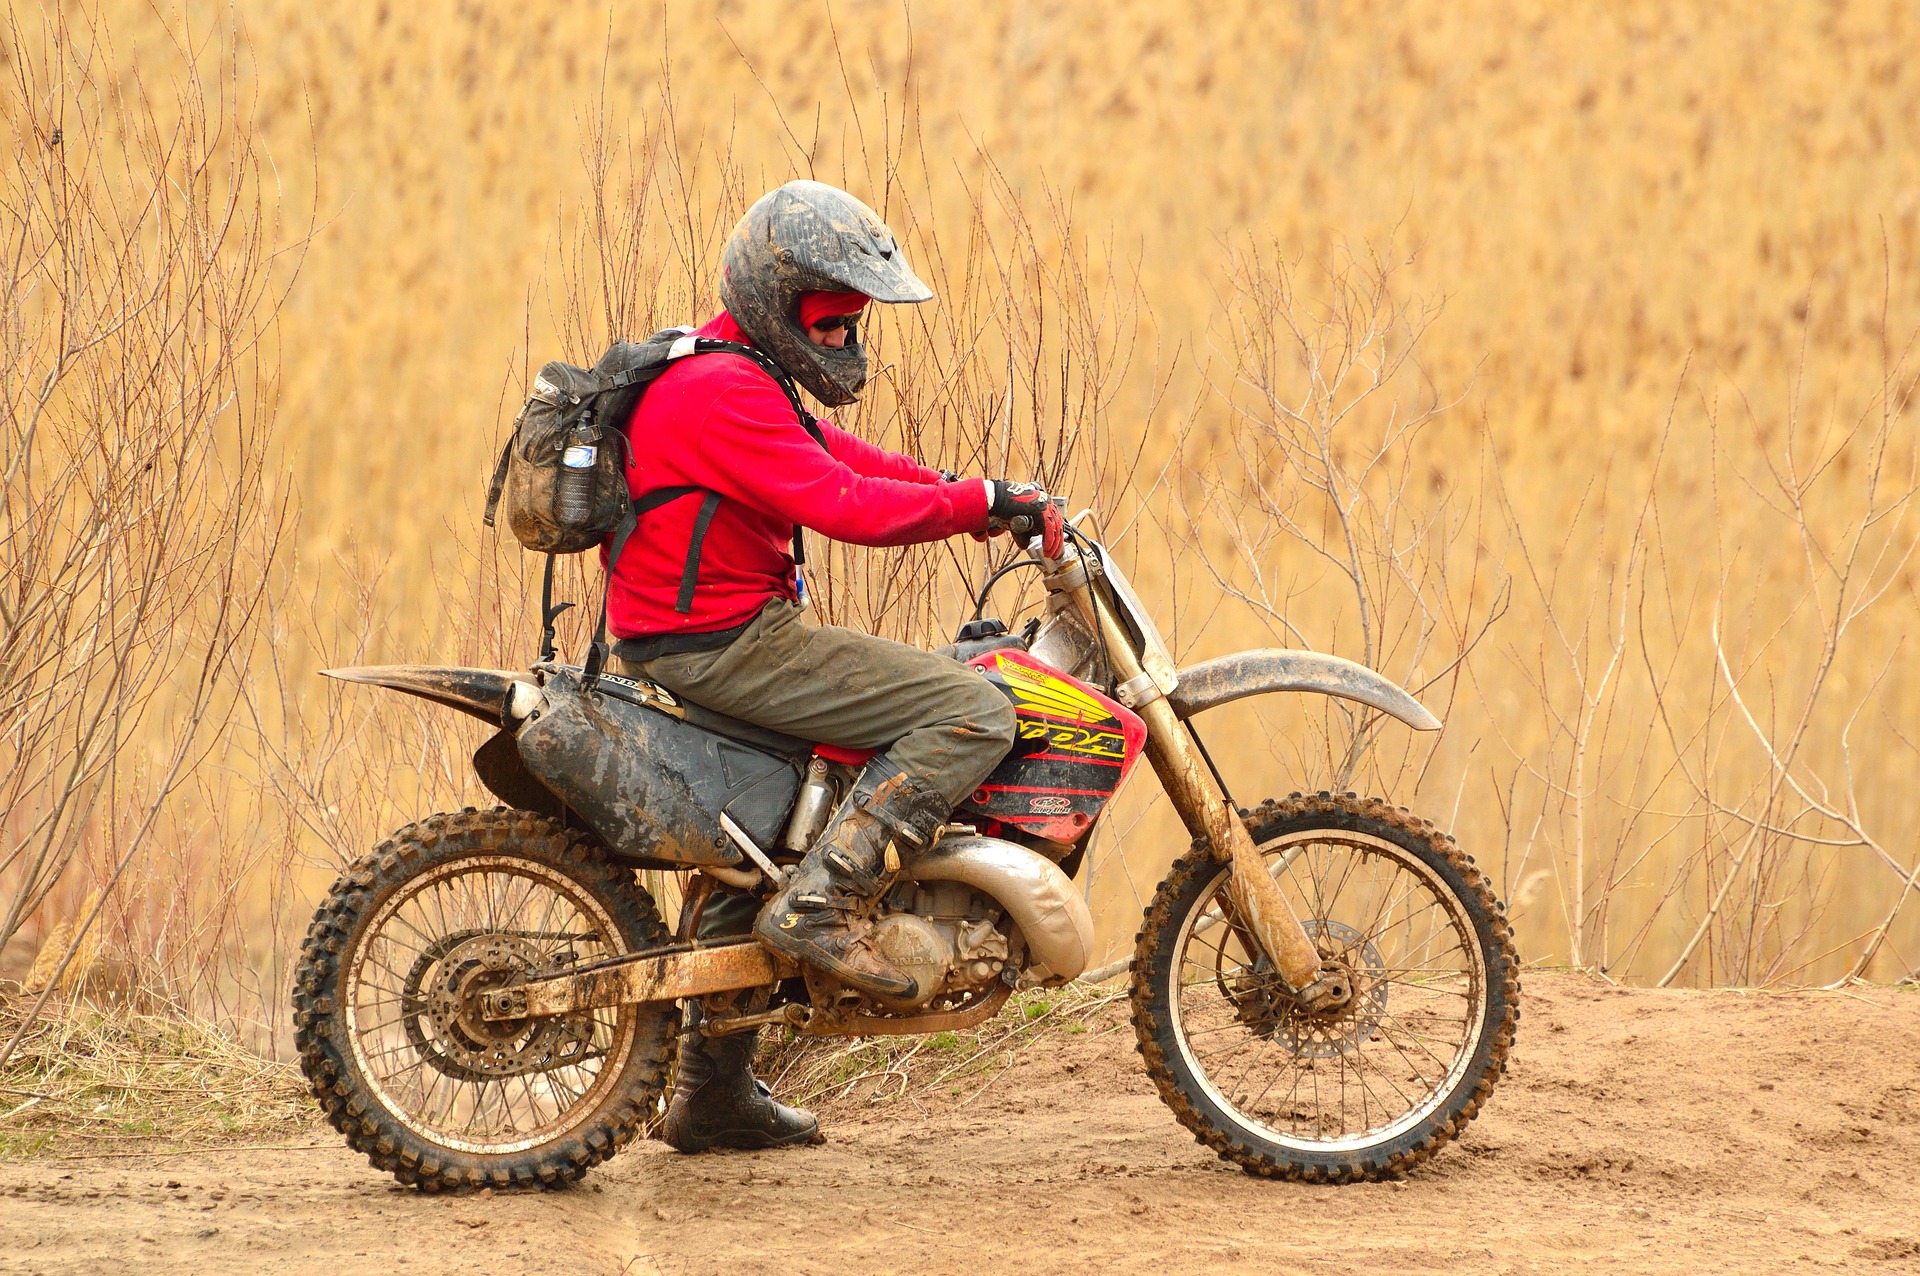 Man is riding his dirt bike with backpack and helmet